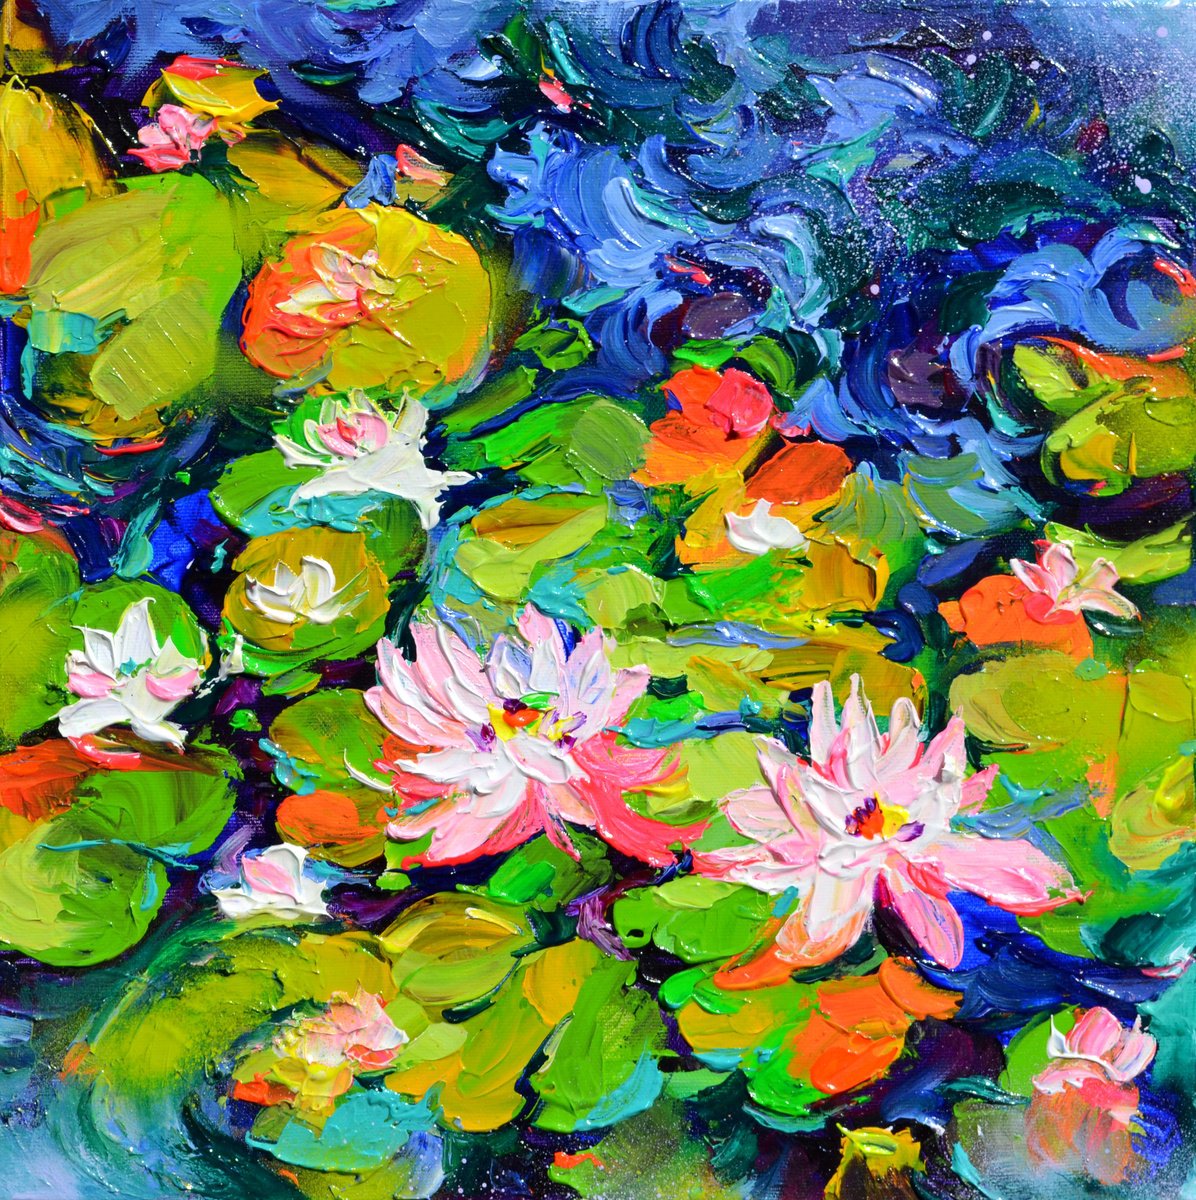 Water Lilies on the Pond by Soos Roxana Gabriela